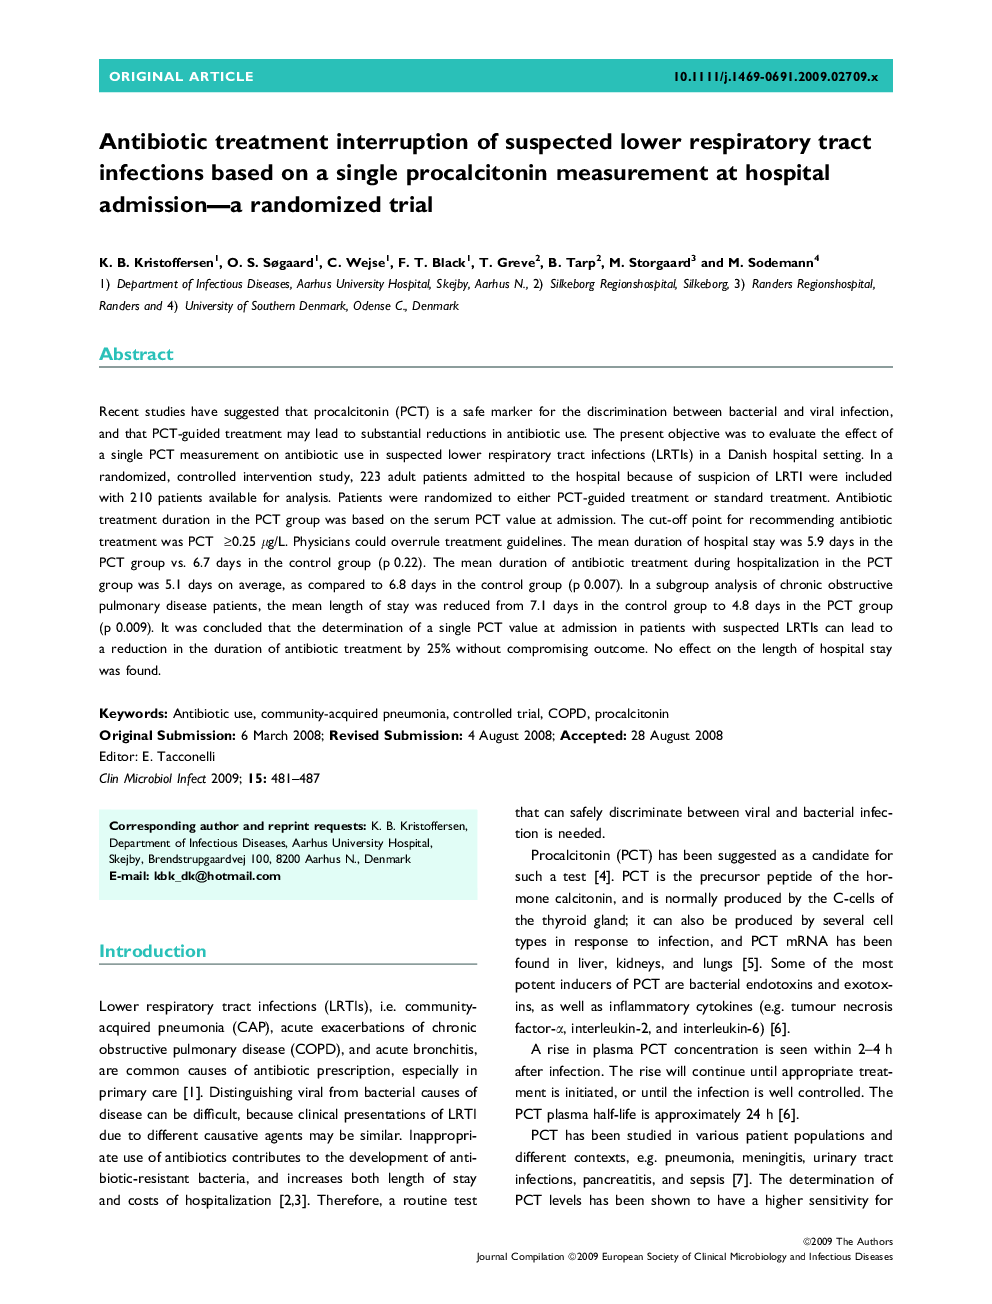 Antibiotic treatment interruption of suspected lower respiratory tract infections based on a single procalcitonin measurement at hospital admission—a randomized trial 